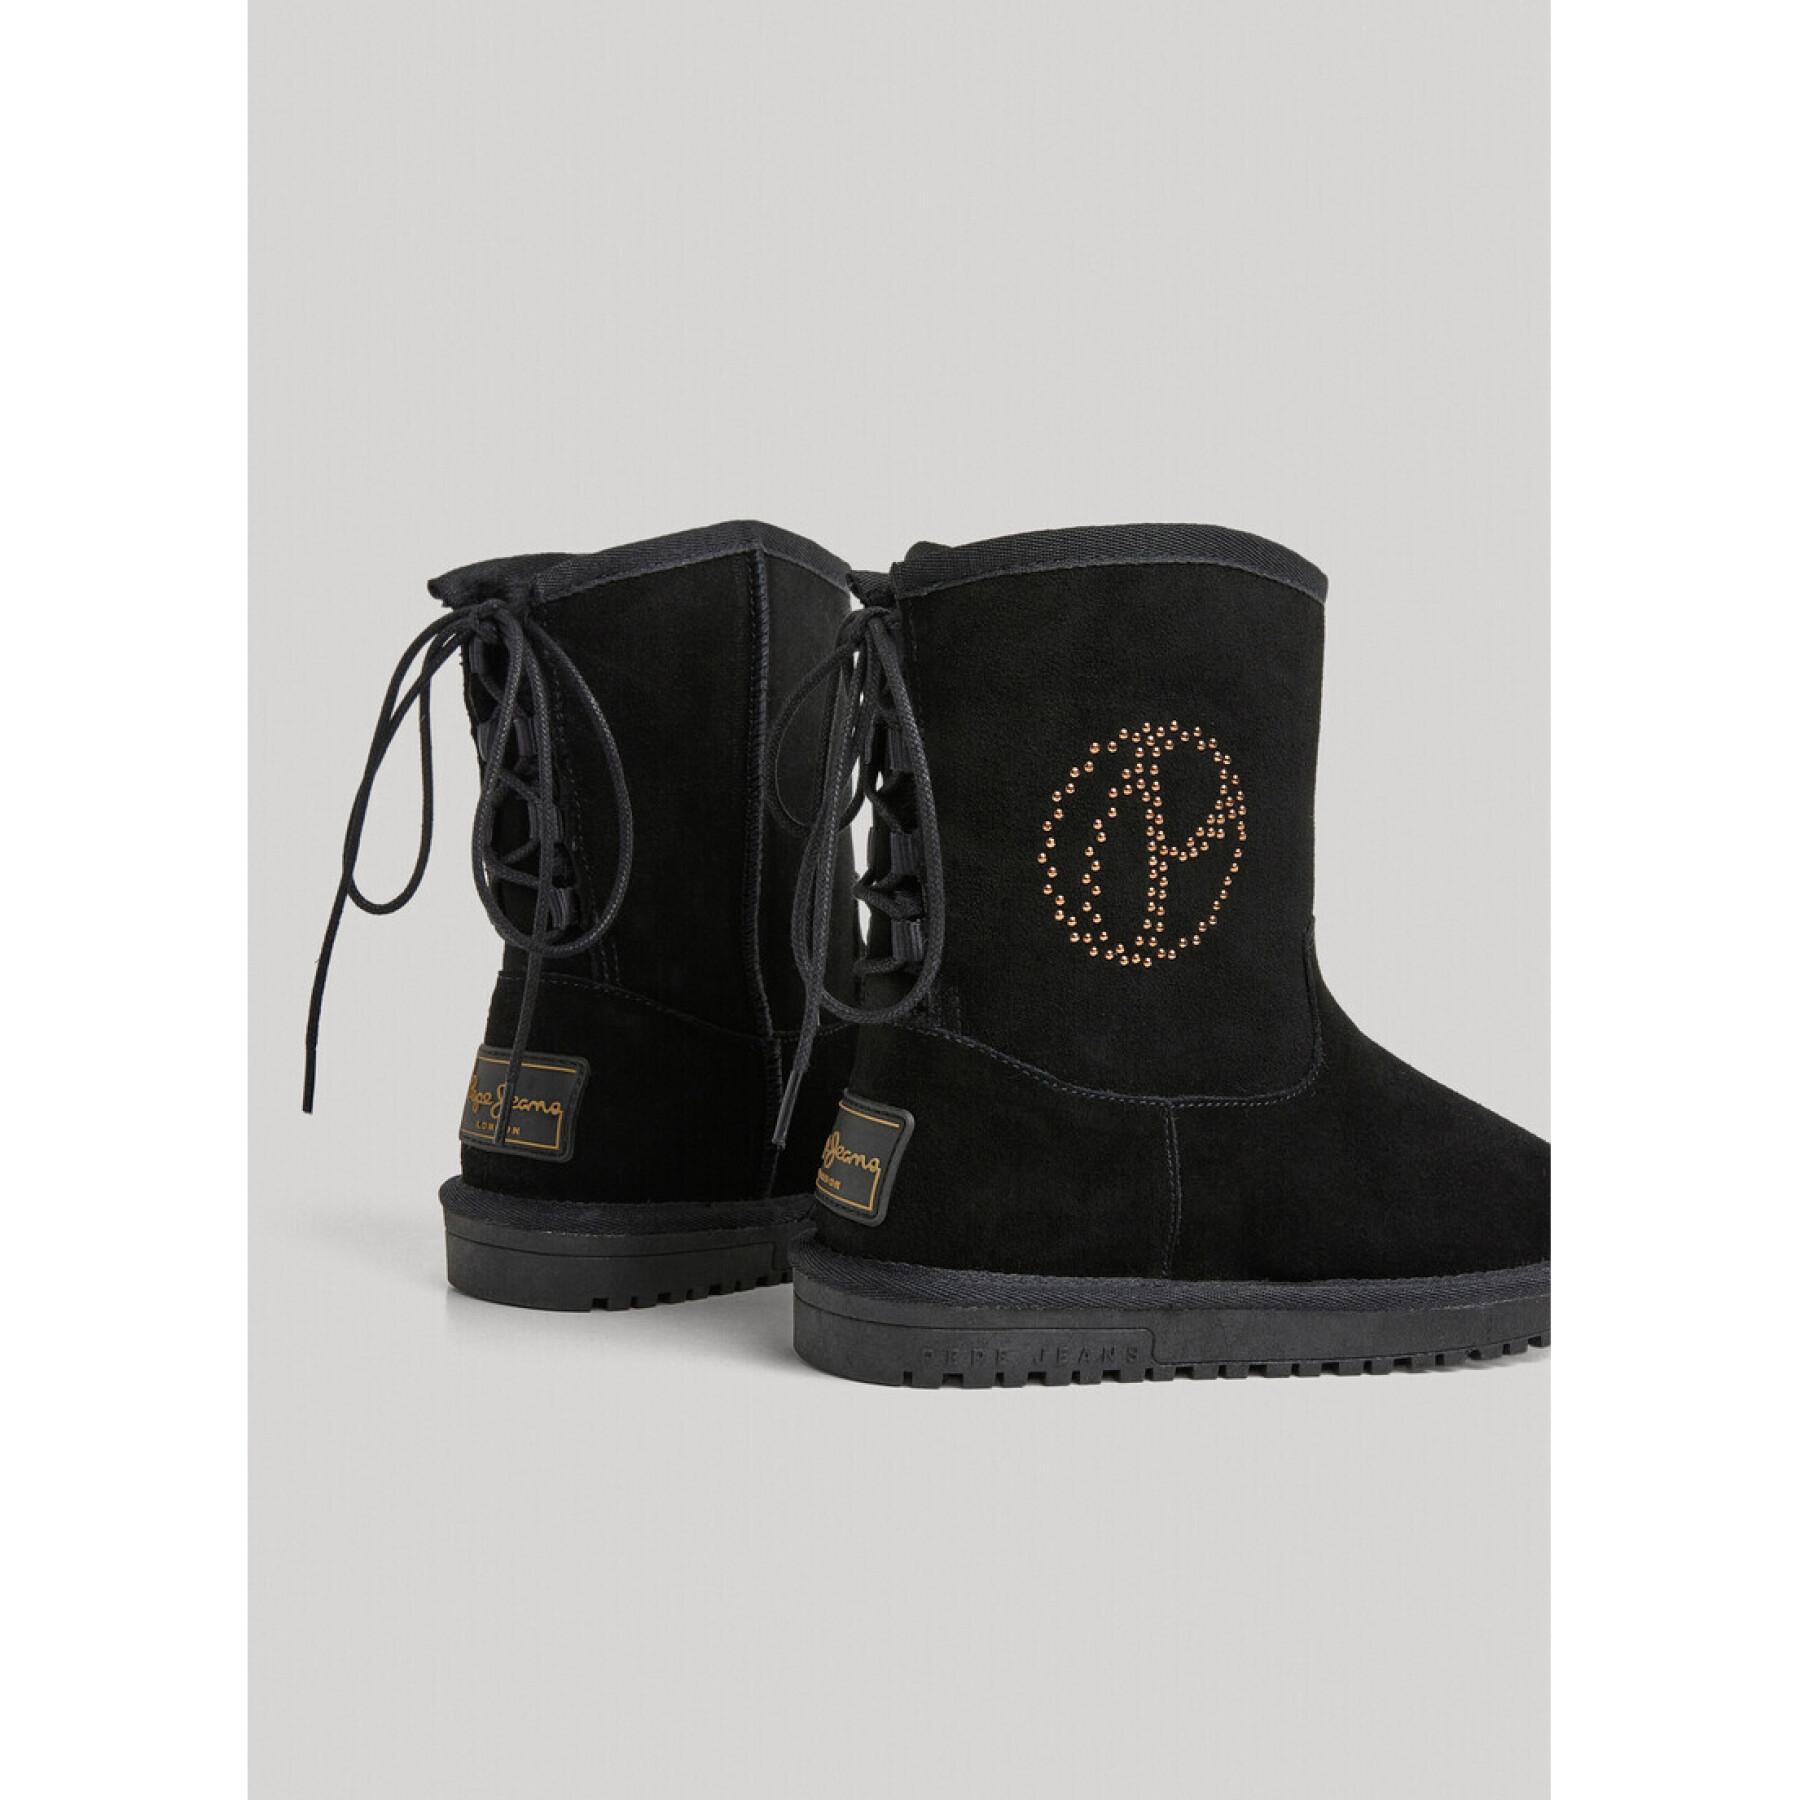 Bottines femme Pepe Jeans Diss Glam 112211